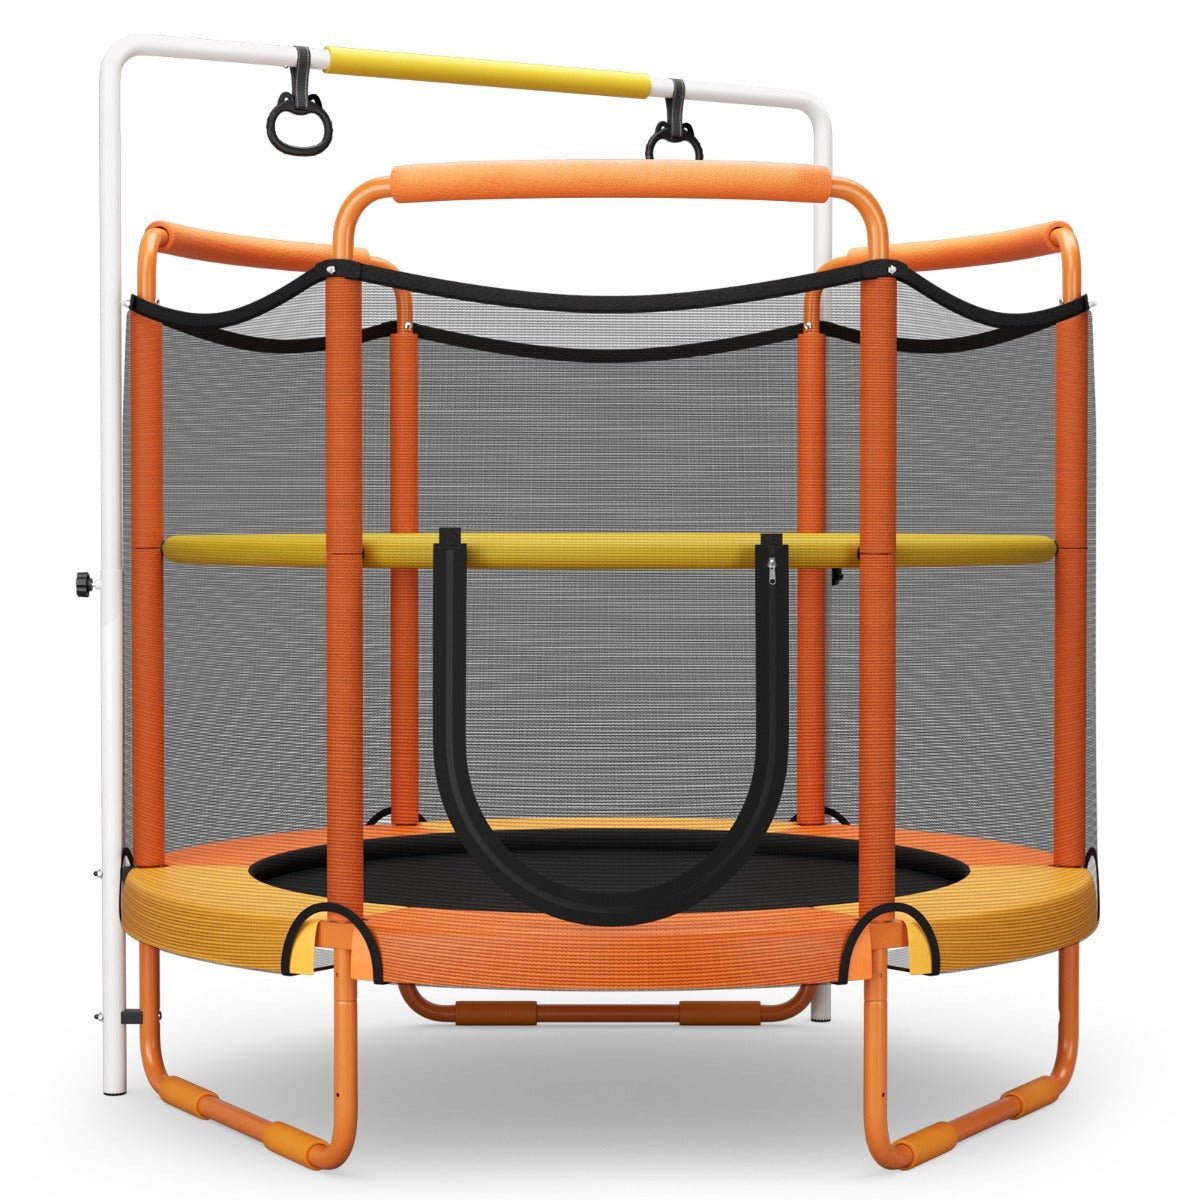 Jump into Fun: 152cm Kids 3-in-1 Game Trampoline with Enclosure Net